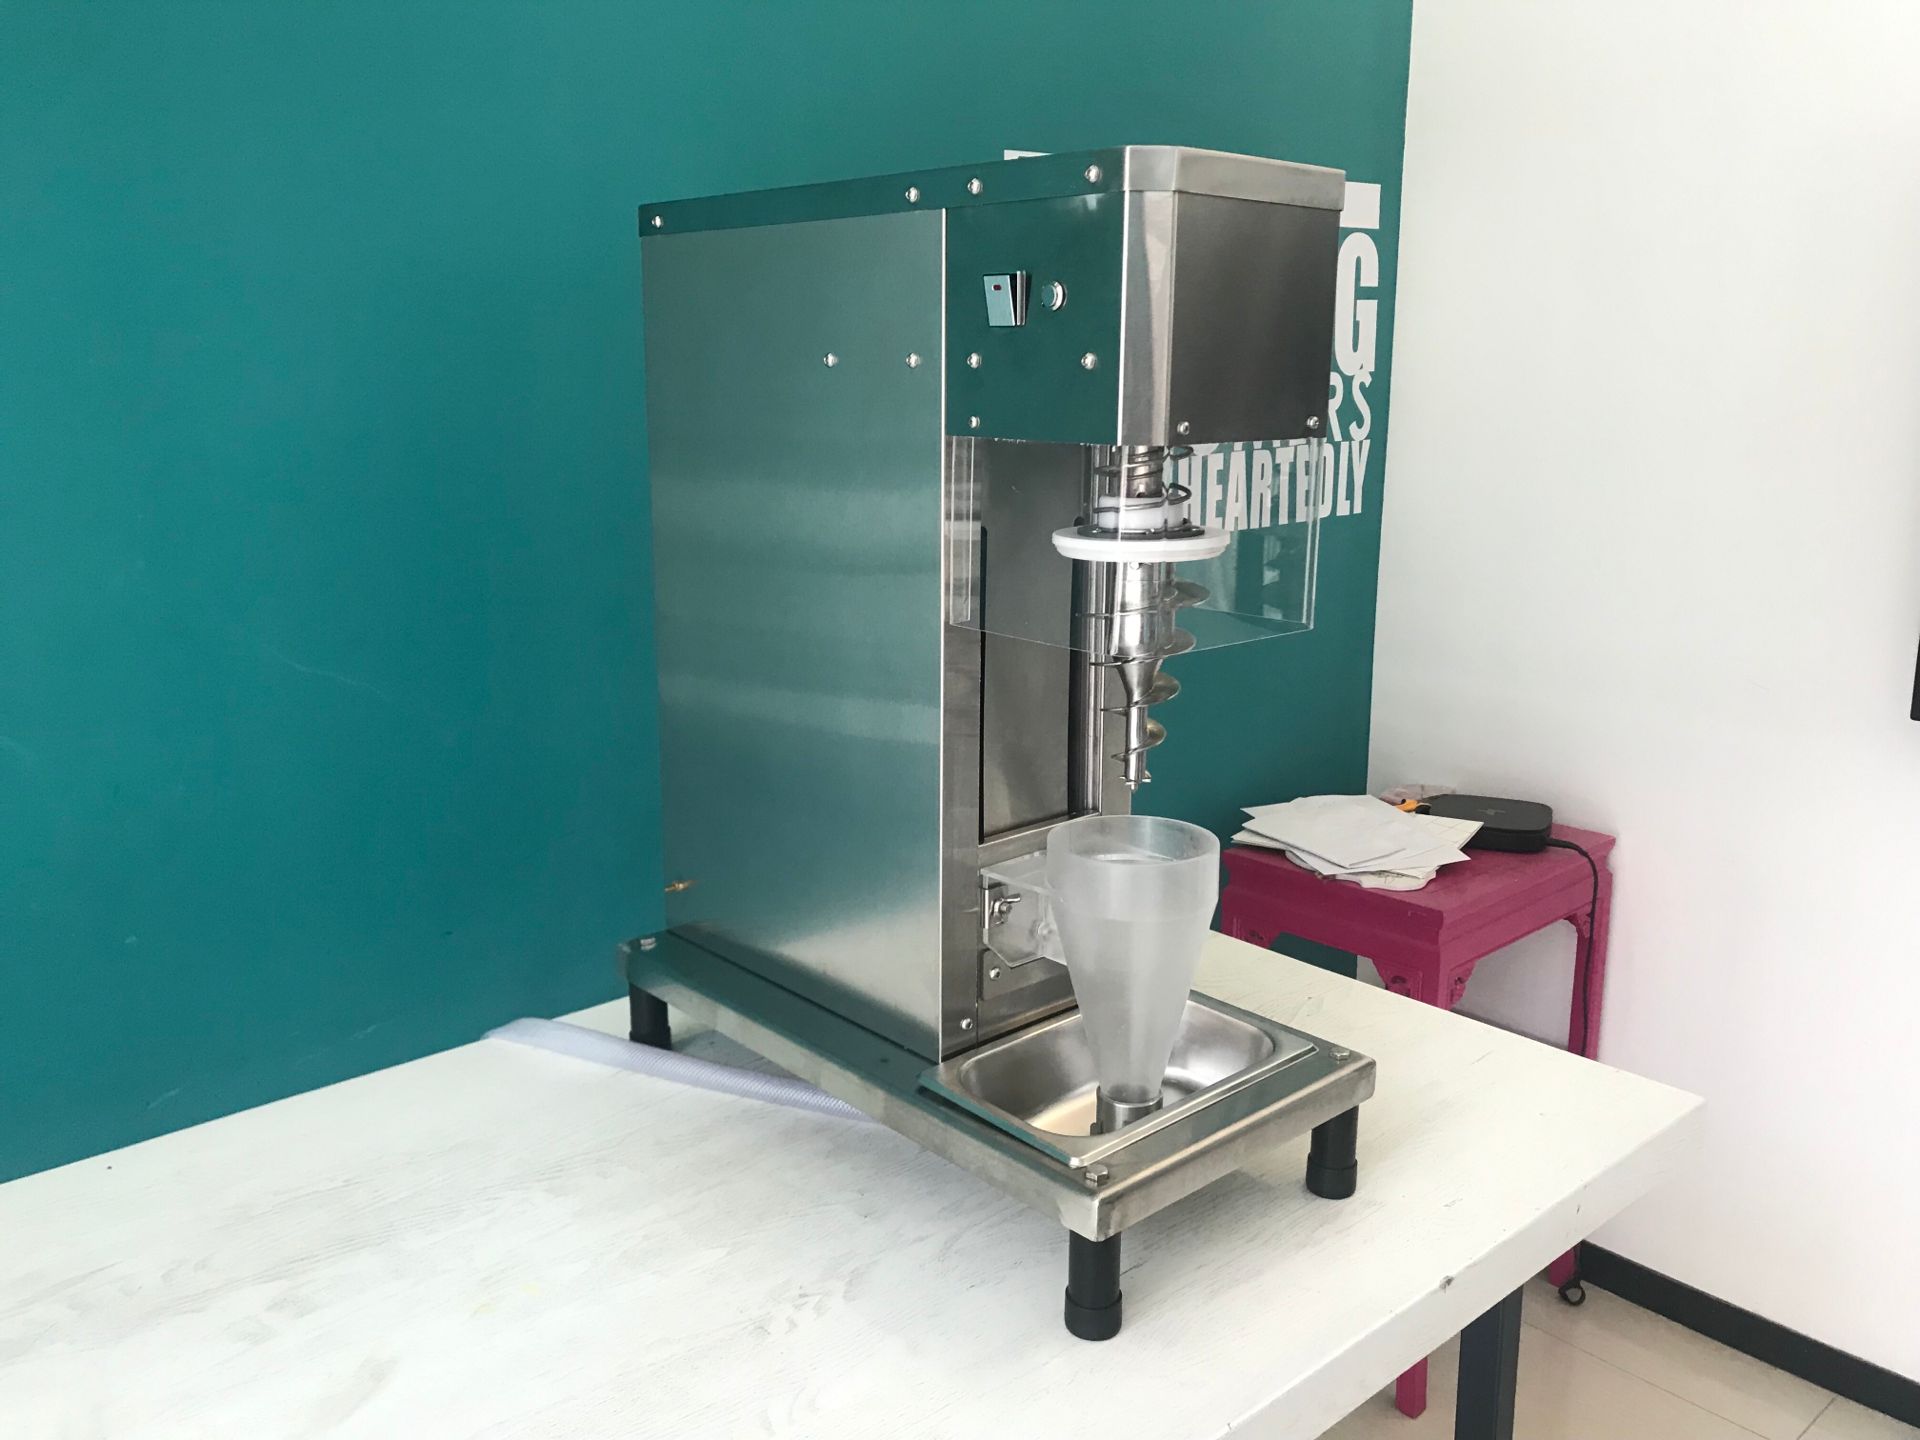 Commerical Application Soft Frozen Real Fruit Ice Cream Machine